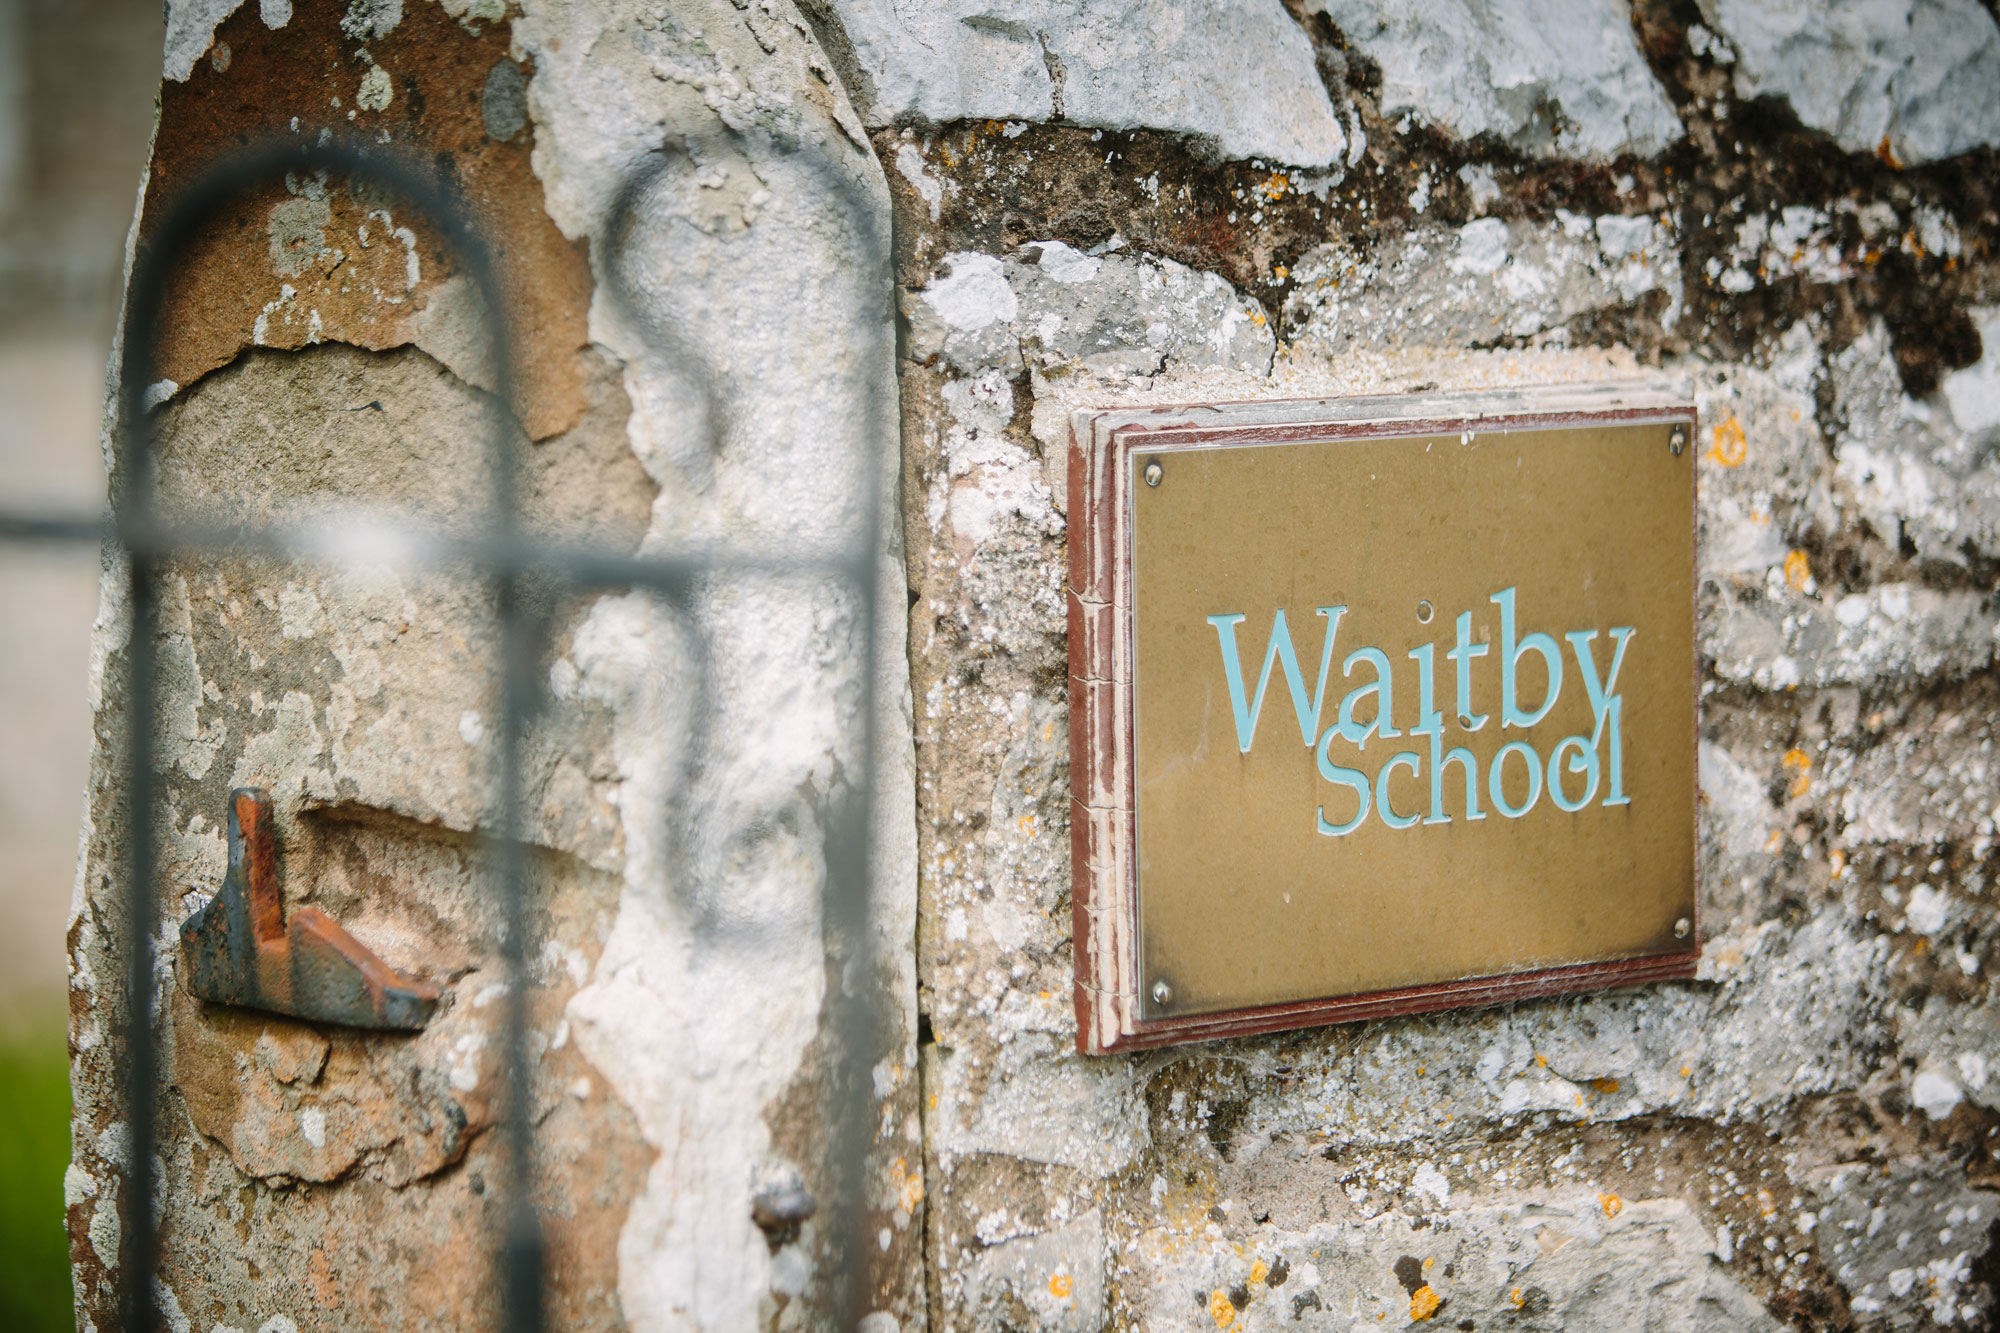 Welcome to Waitby School. And yes, we have since repolished and painted the sign!